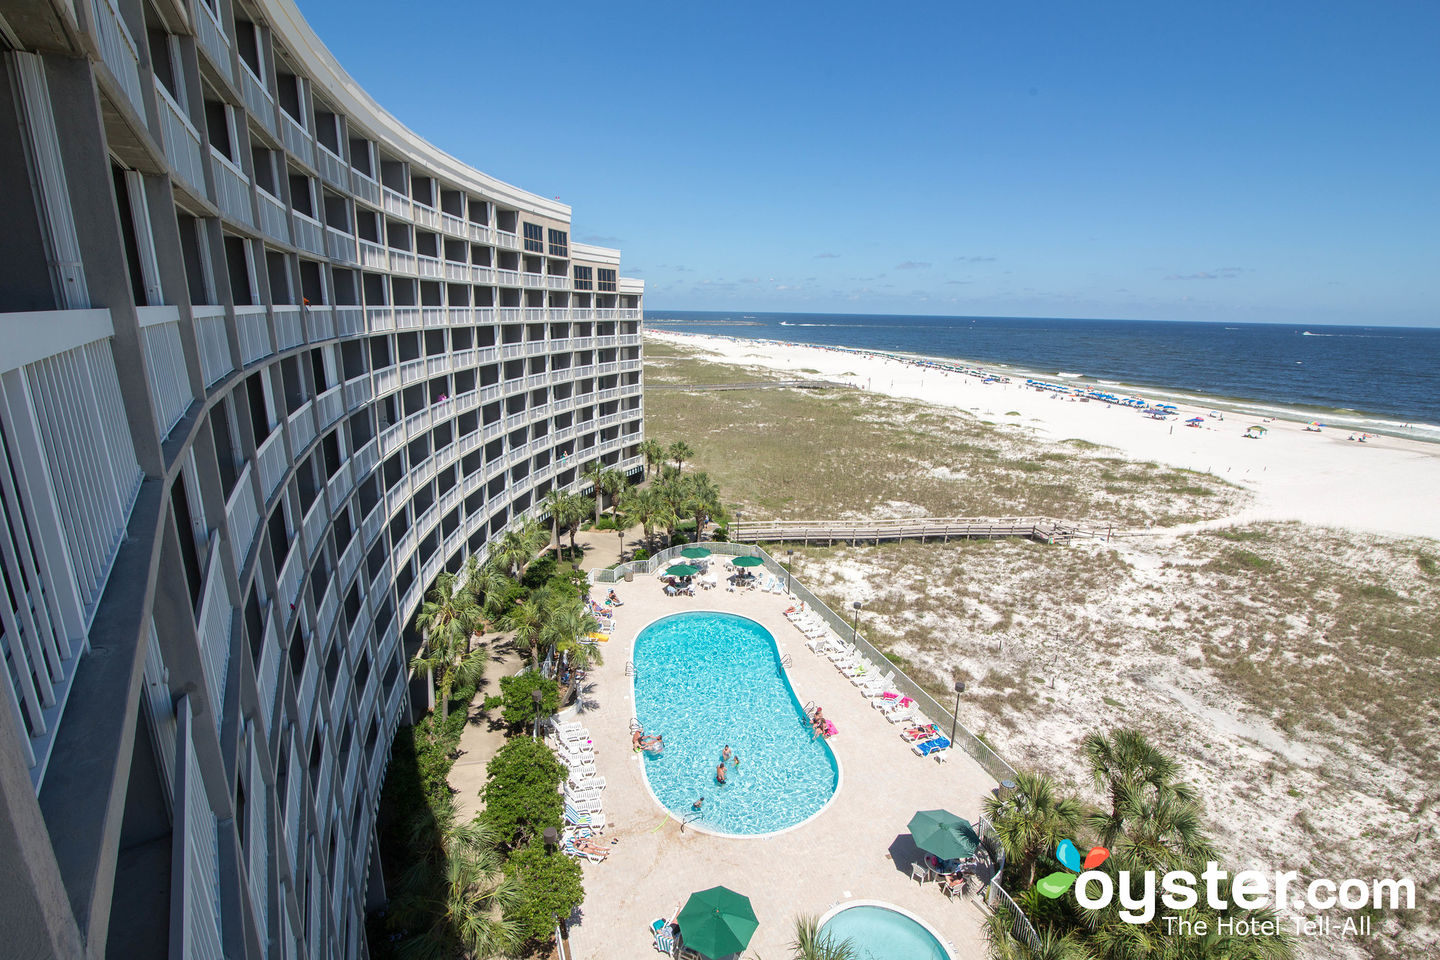 Island House Hotel Orange Beach A Doubletree By Hilton Review What To Really Expect If You Stay